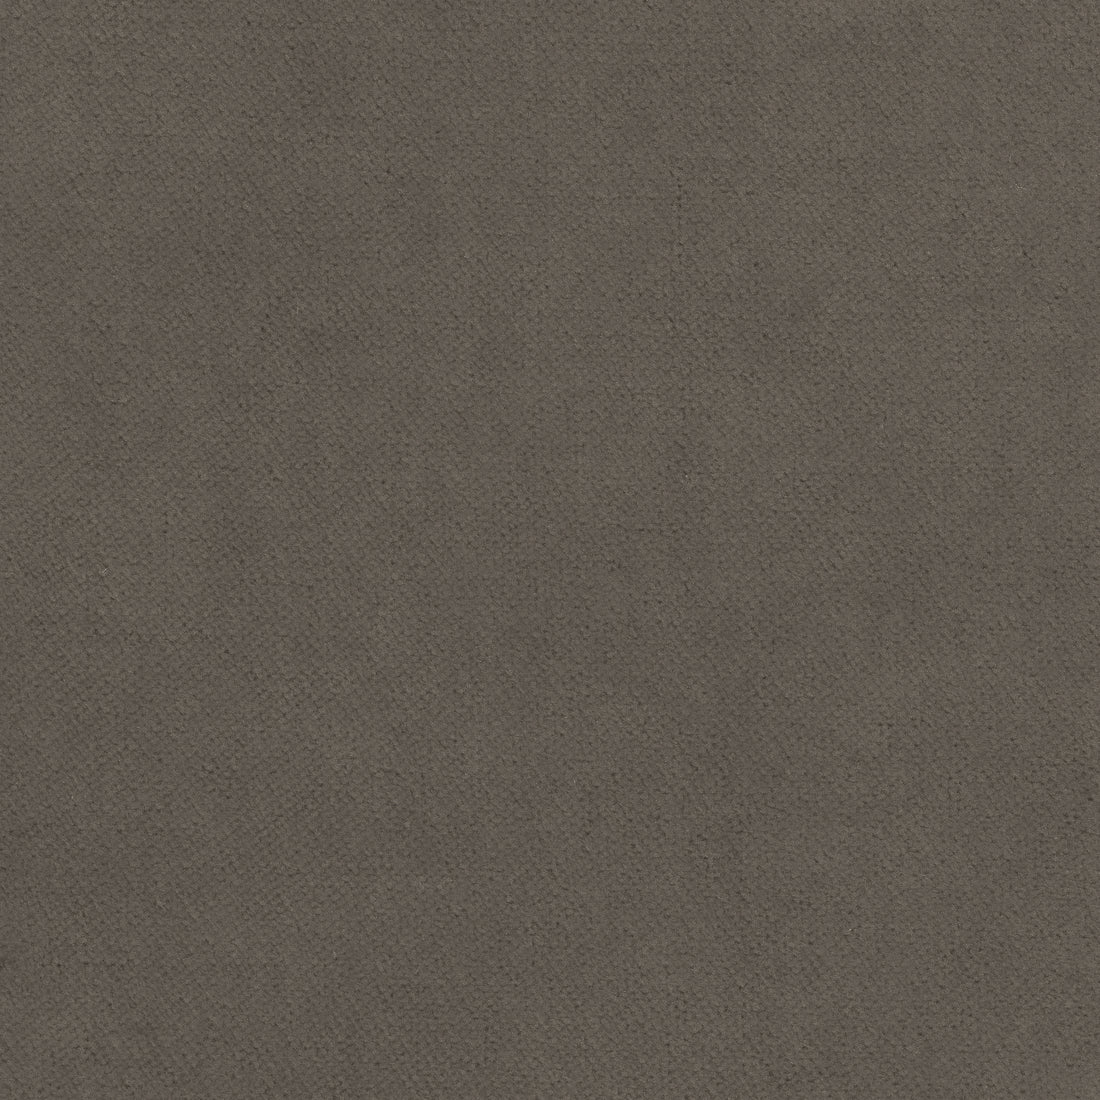 Club Velvet fabric in flannel color - pattern number W7220 - by Thibaut in the Club Velvet collection